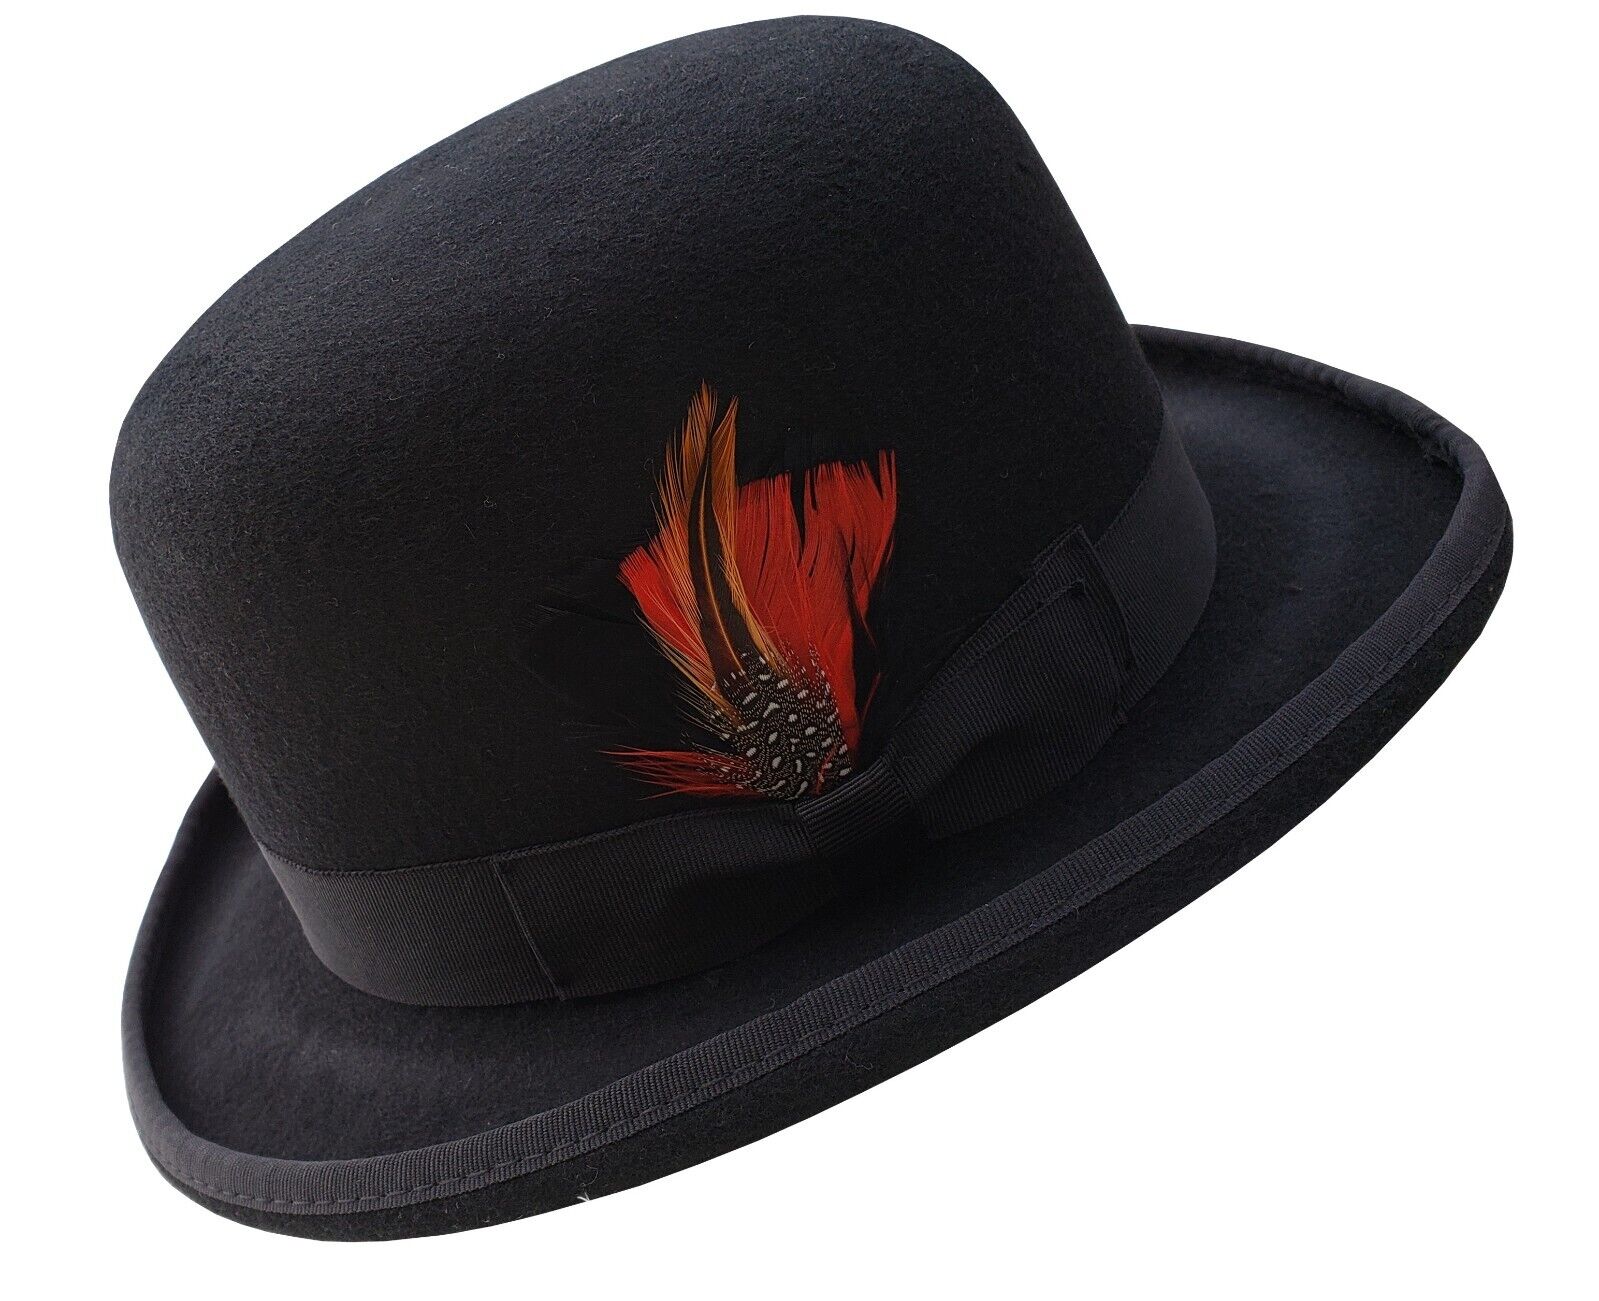 Derby Bowler 100% Wool Felt with Removable Feather Fedora Hat for Men